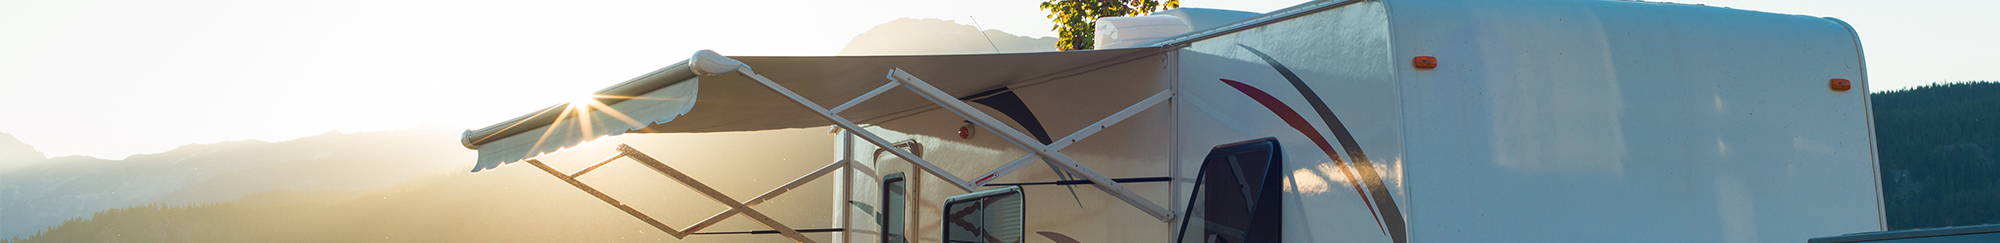 pop up camper awning complete parts canvas